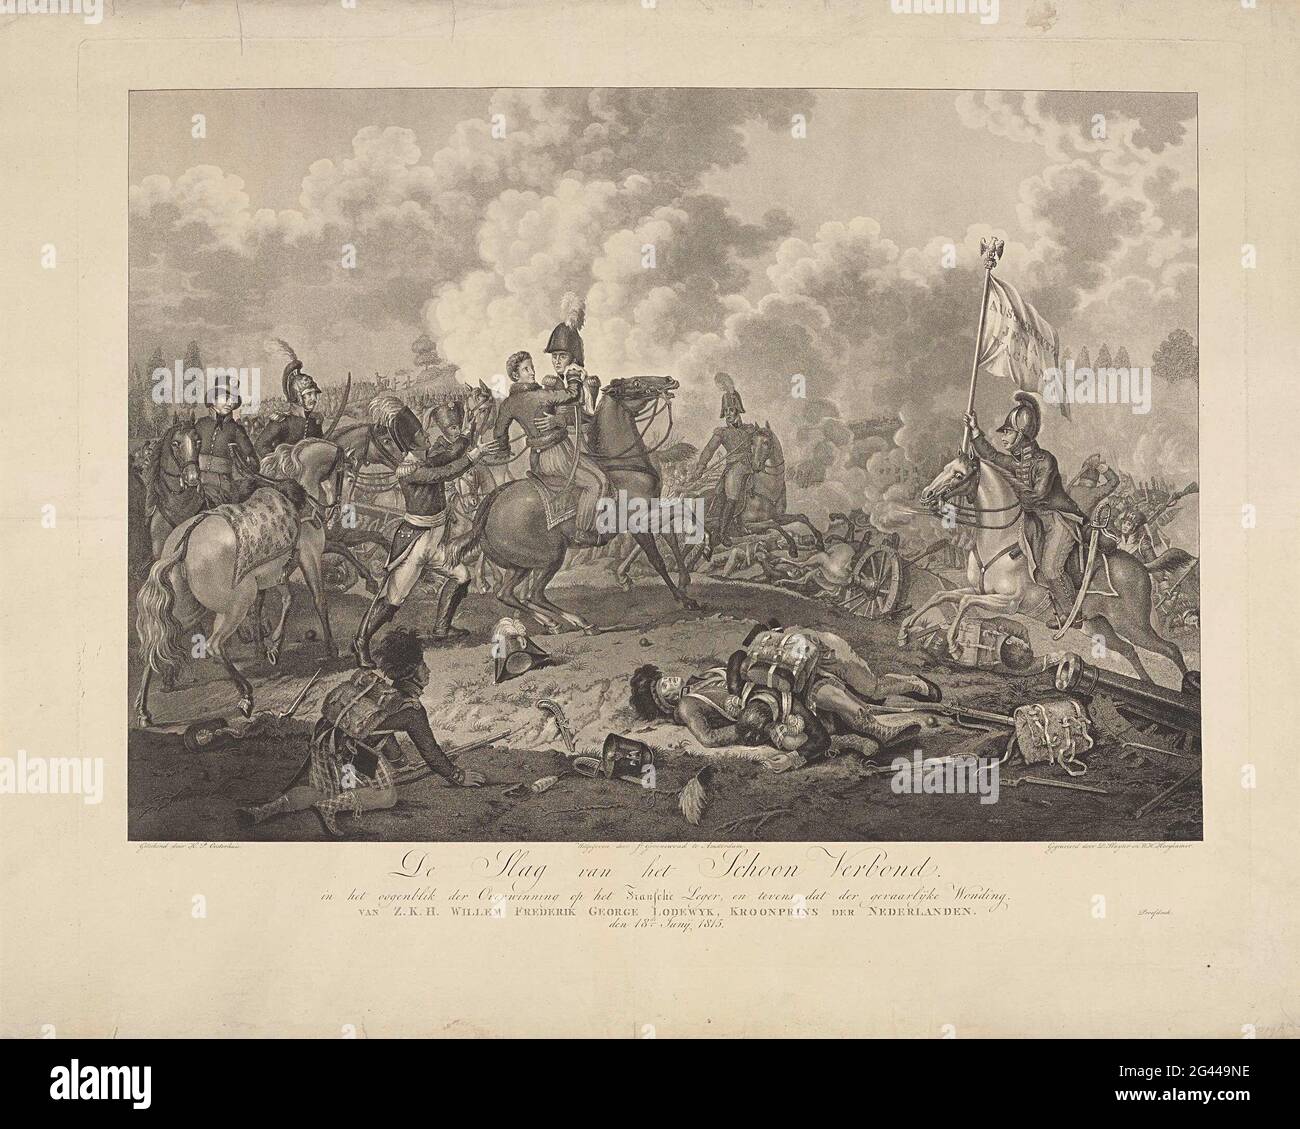 The battle of the clean covenant. In the moment of the victory over the French army, and also that of the dangerous wonding. Van Z.K.H. Willem Frederik George Lodewijk, Crown Prince of the Netherlands. The 18th Junij 1815. The Prince of Orange is injured during the Battle of Waterloo, June 18, 1815. Central the prince on horseback that has been injured on his shoulder, his staff rushes. A dragonder comes from the right with the conquered French standard on which the Namur Austerlitz, Jena and Wagram. In the foreground on the left an injured Scottish soldier. See also the design drawing and the Stock Photo